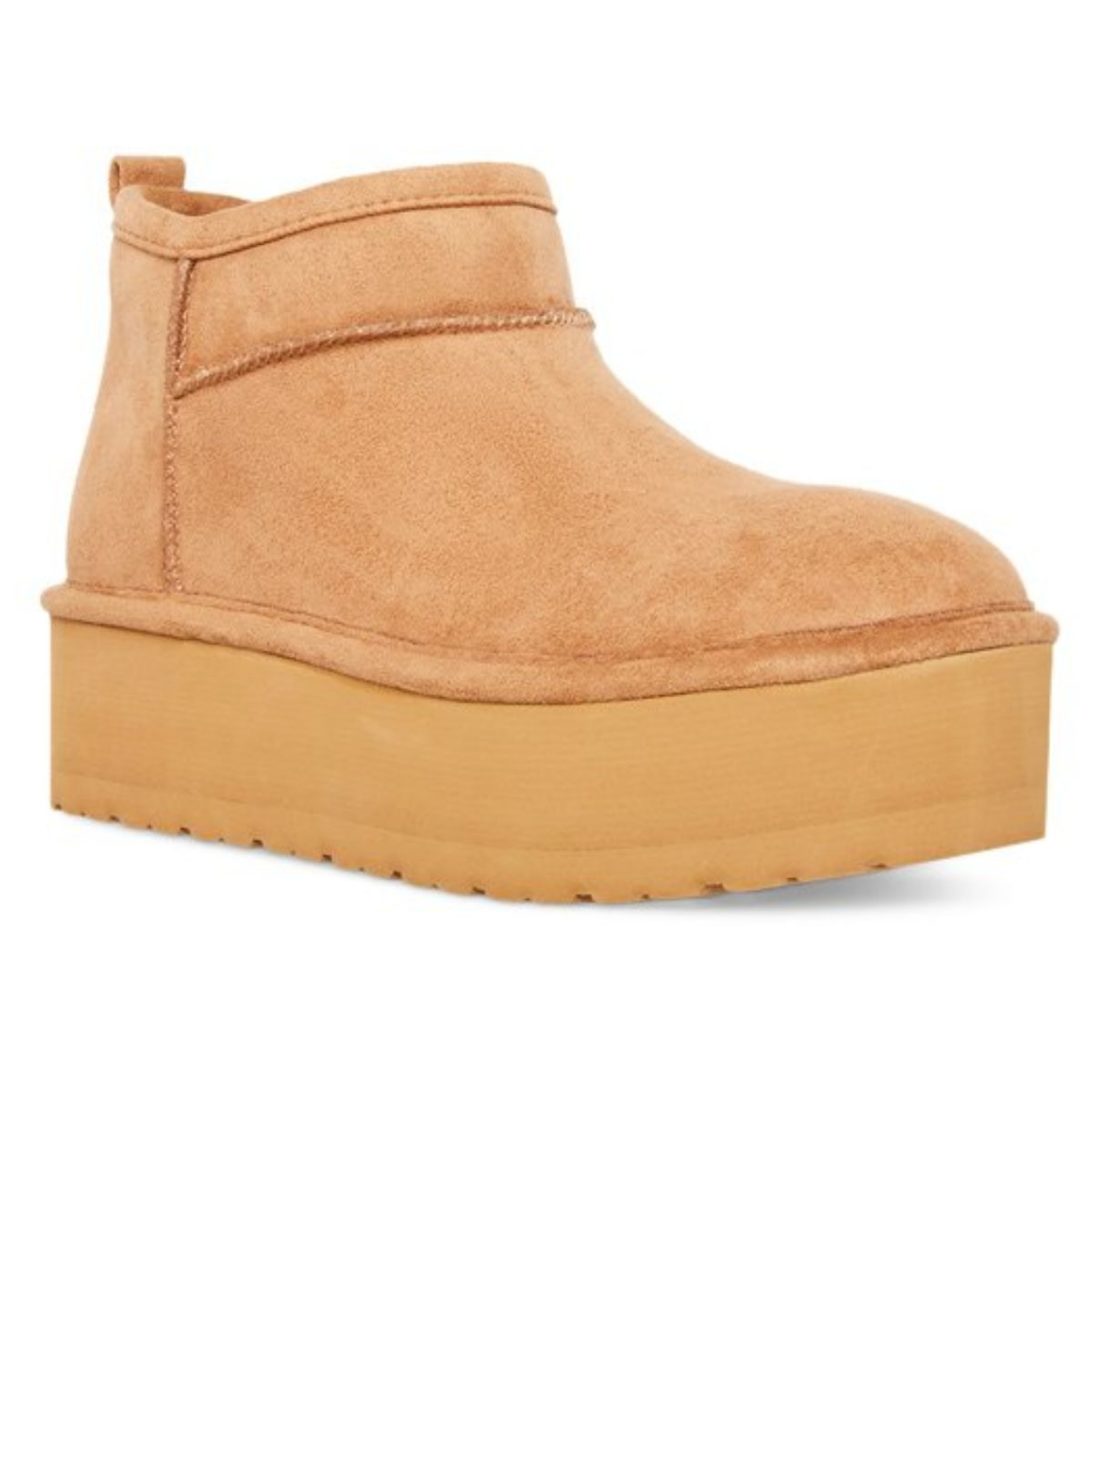 madden girl embracce platform bootie in tan